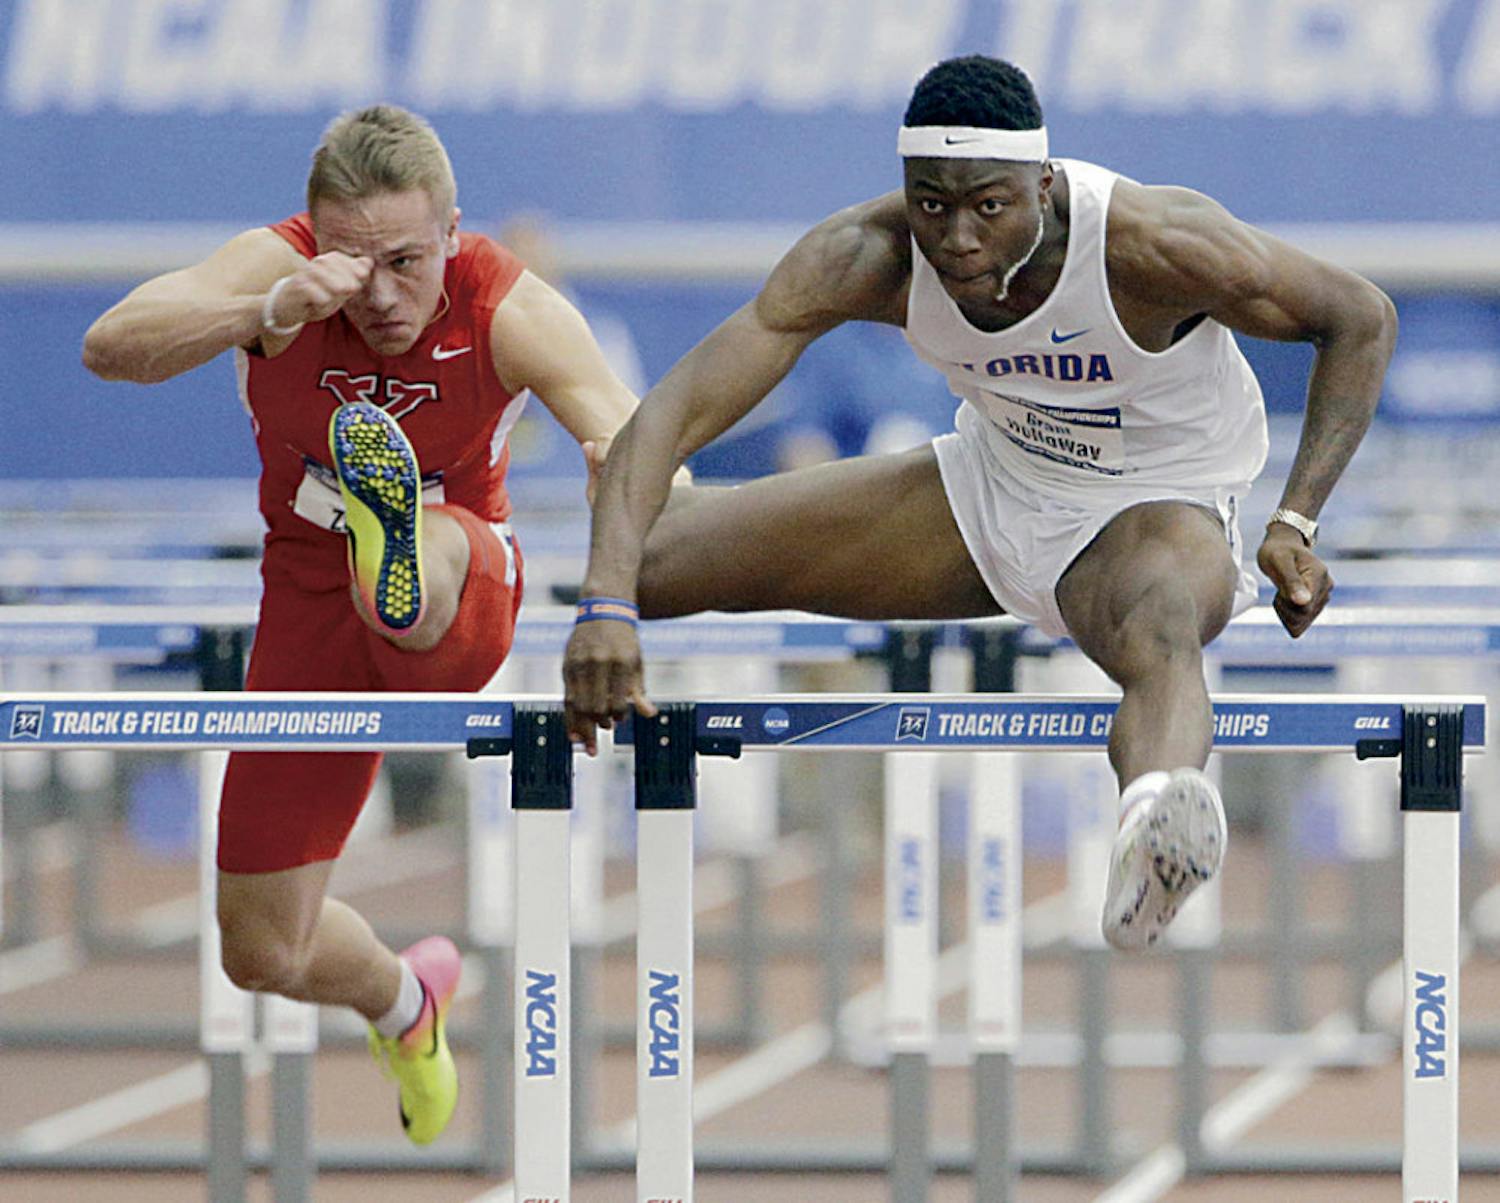 Sophomore hurdler Grant Holloway was one of the many UF track and field athletes who were named All-Americans.